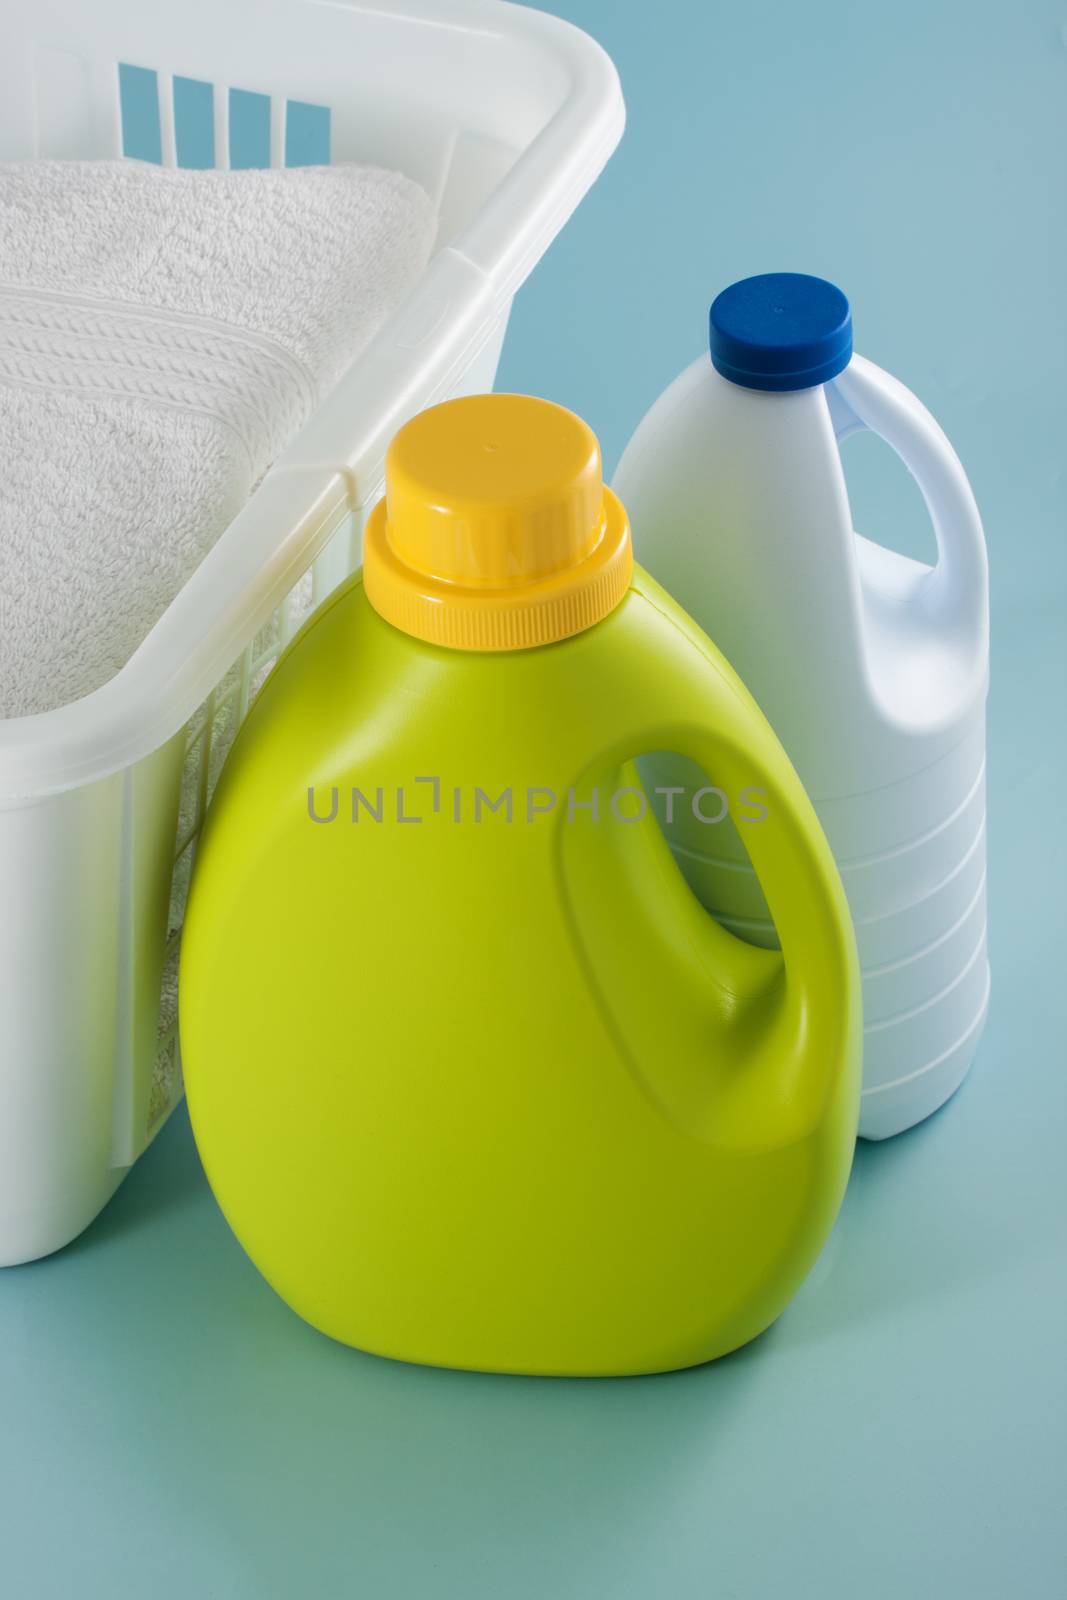 laundry detergent and bleach bottles by lanalanglois